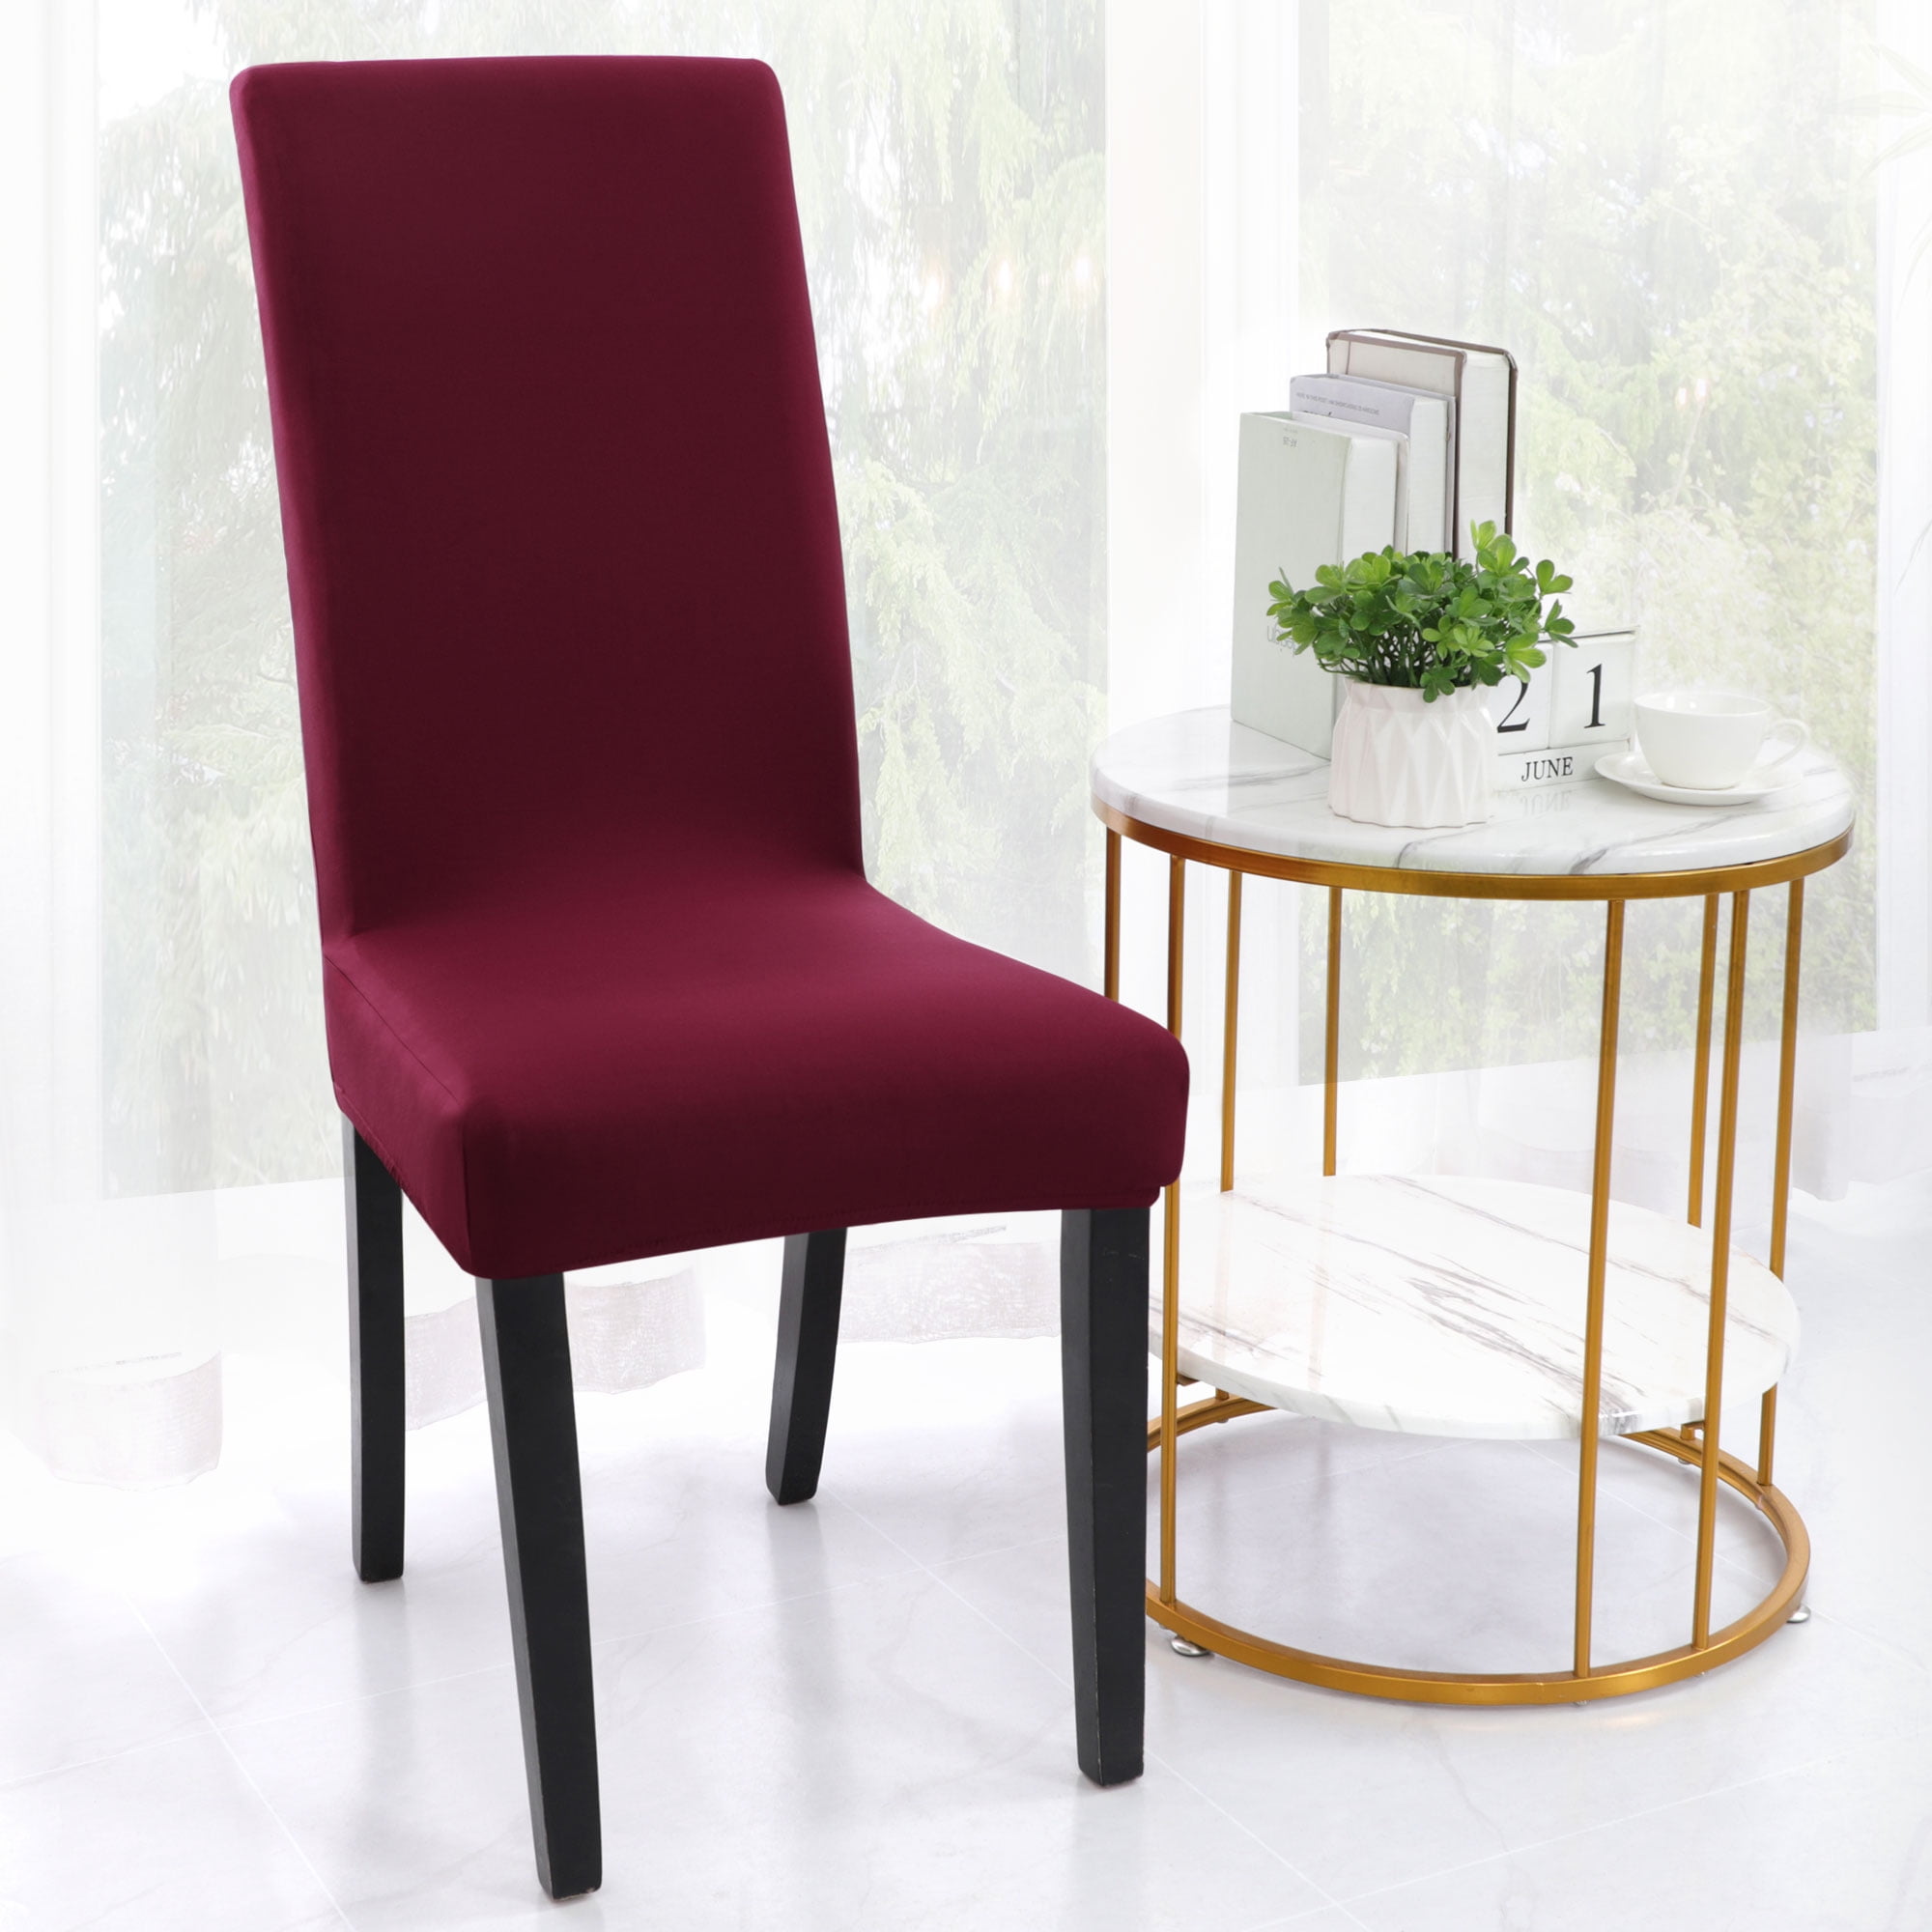 Details about   Dining Chair Cover Stretch Slijcovers Universal Removable Chair Protective RES 